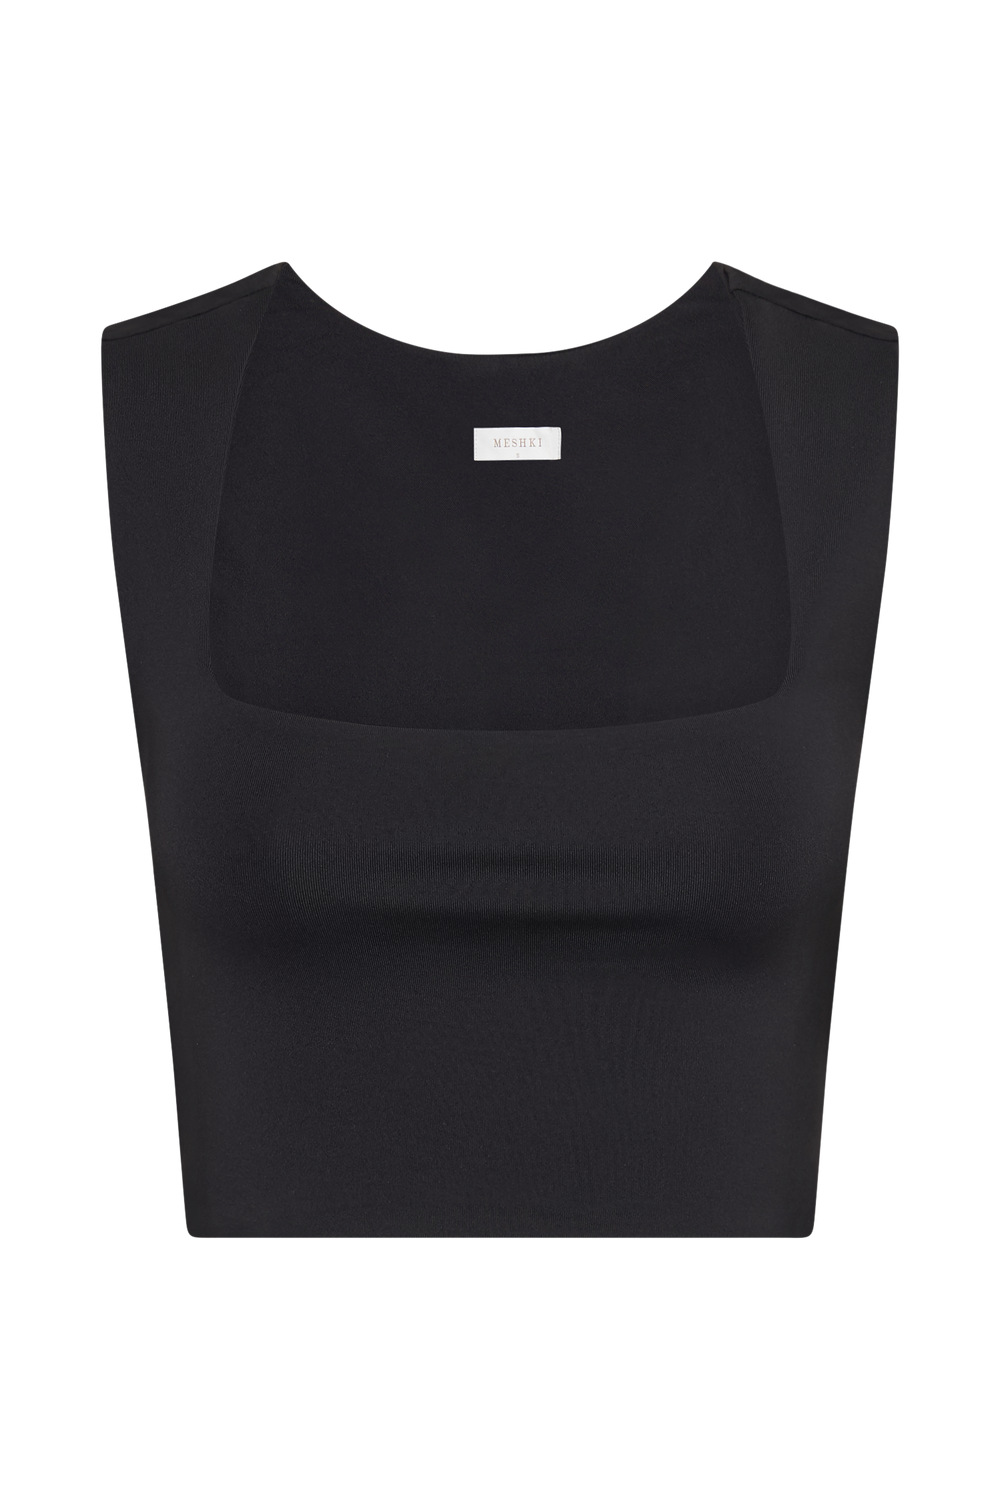 Linley Recycled Nylon Cropped Top - Black